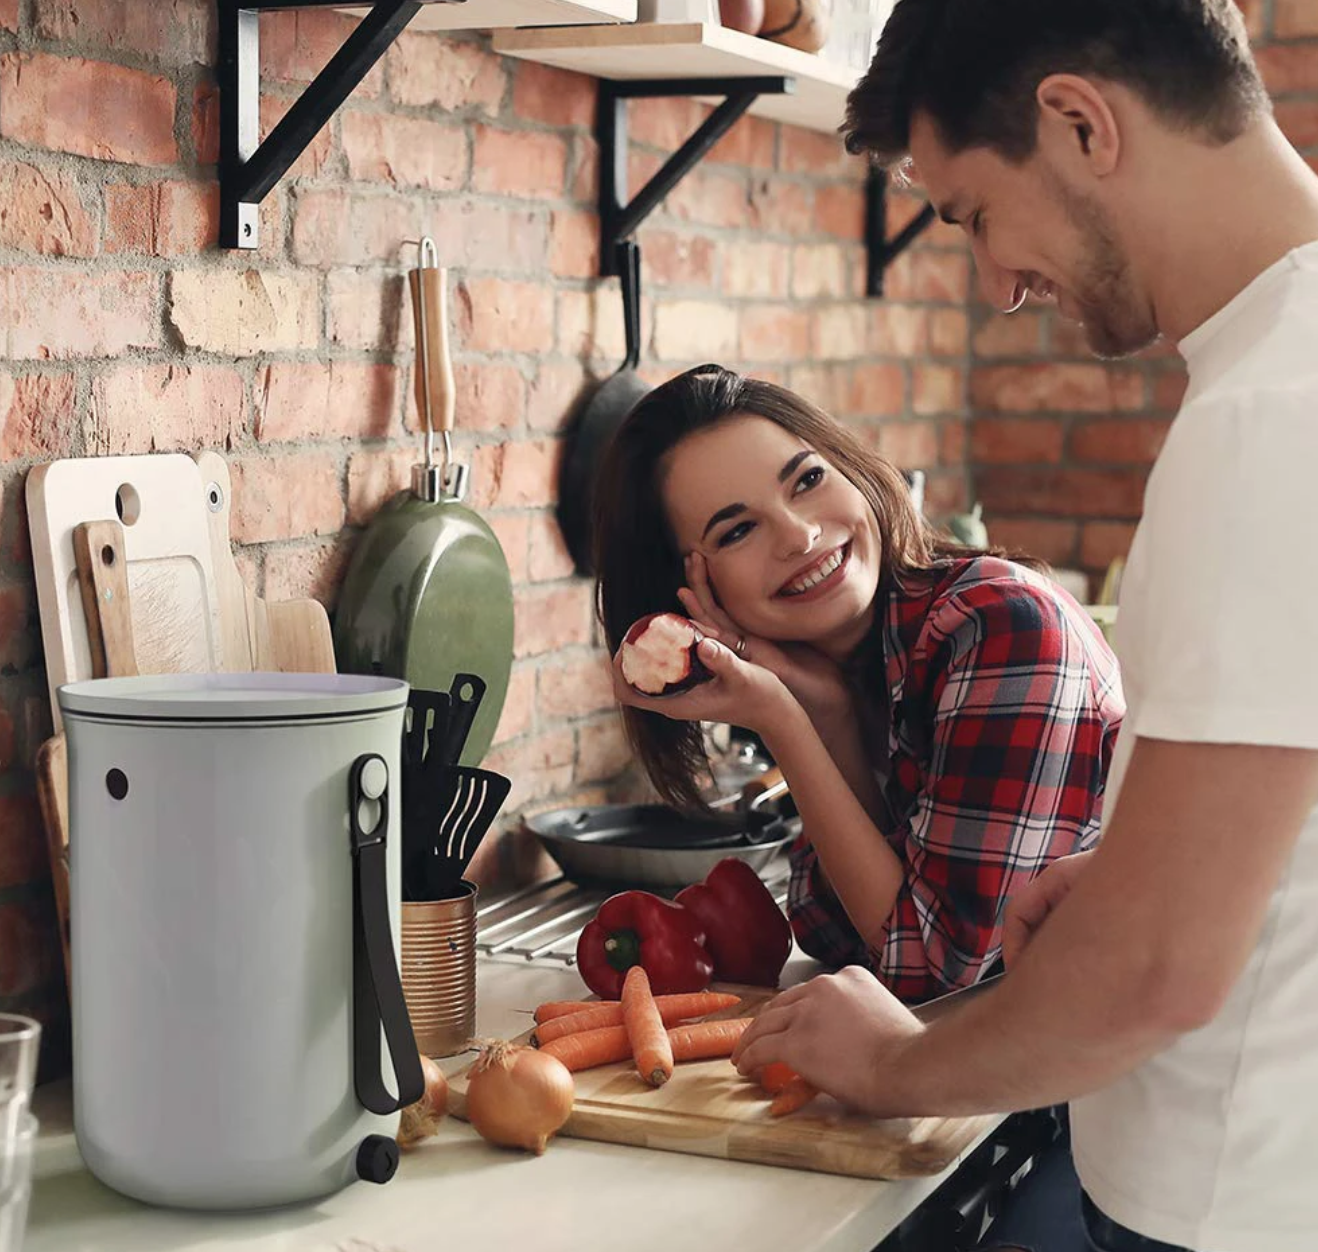 A man and woman are composting in a kitchen using bokashi.